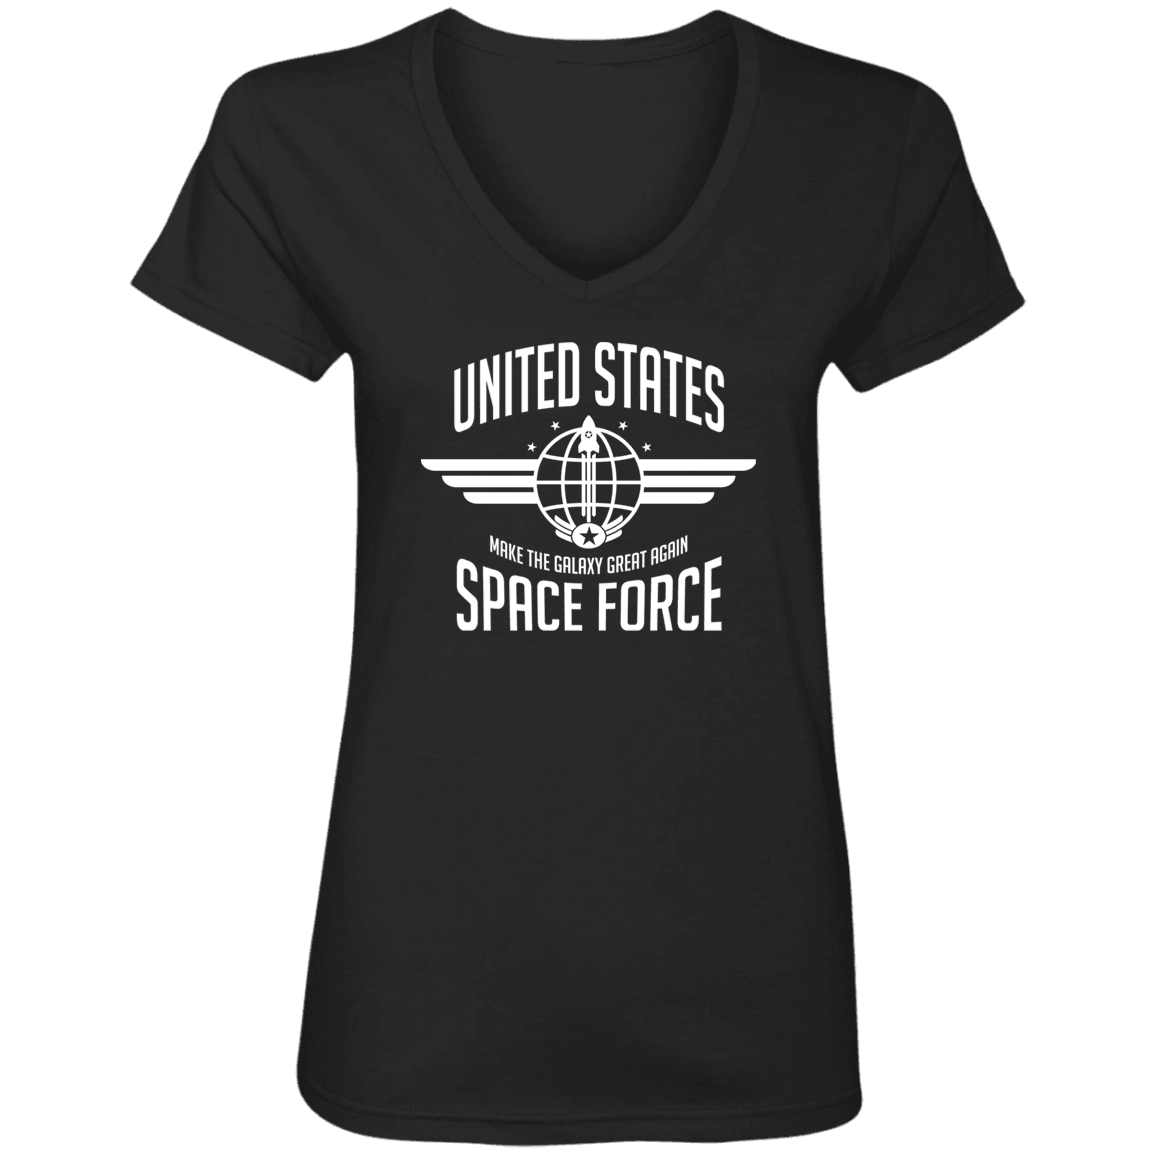 Designs by MyUtopia Shout Out:United States Space Force Ladies' V-Neck T-Shirt,Black / S,Ladies T-Shirts